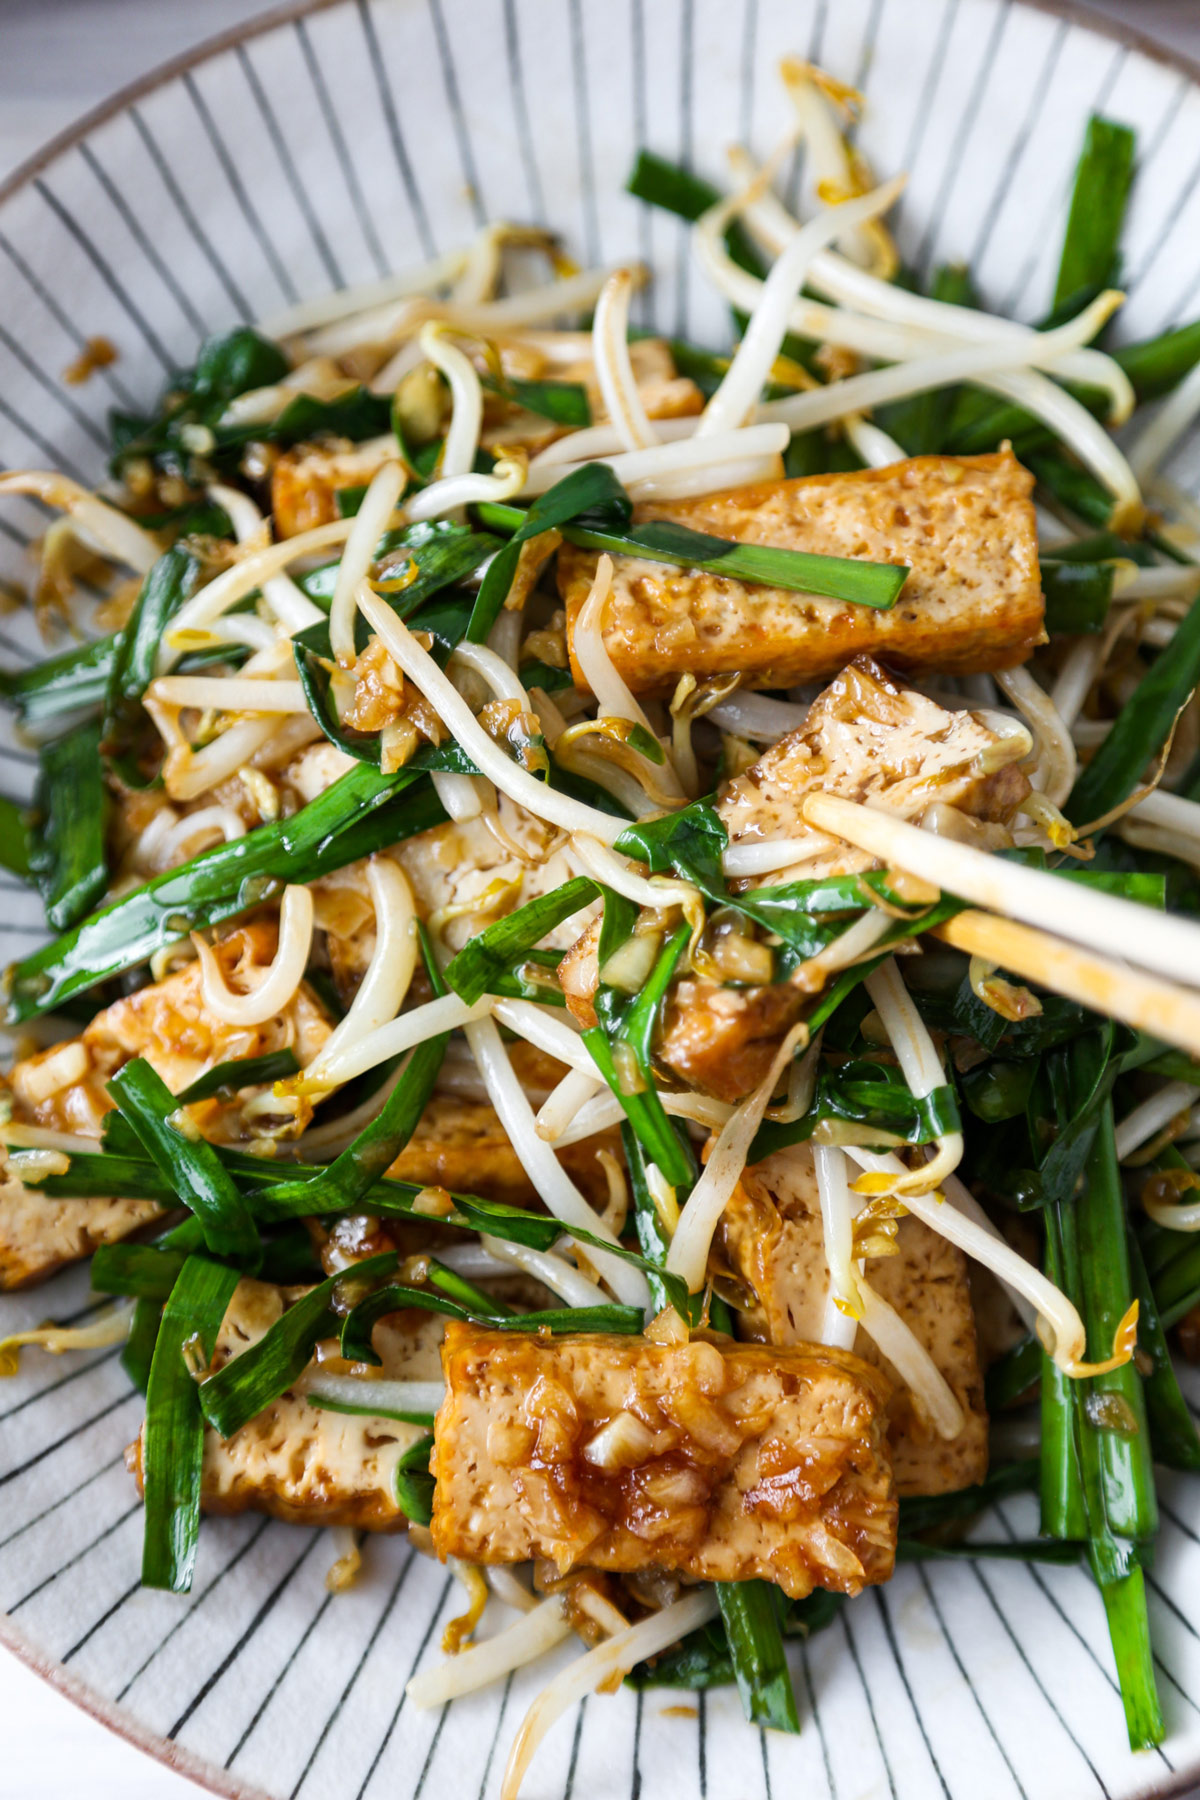 Garlic chives, bean sprouts and tofu stir fry